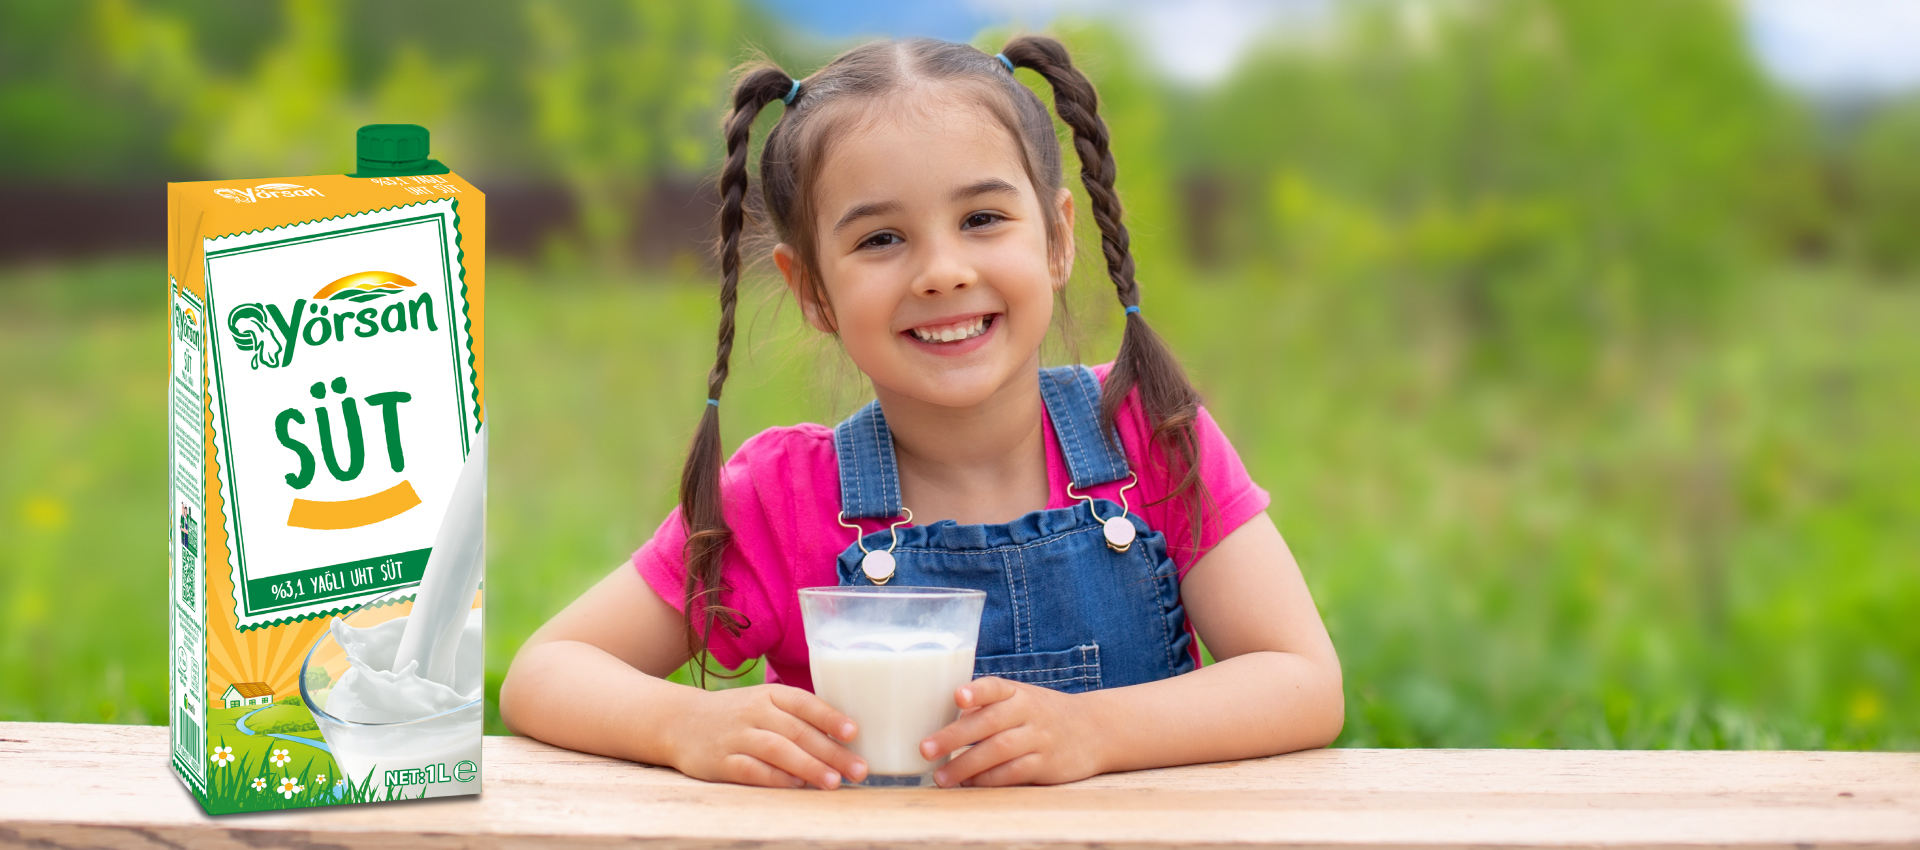 DO WE DRINK MILK EVERY DAY FOR OUR HEALTH?